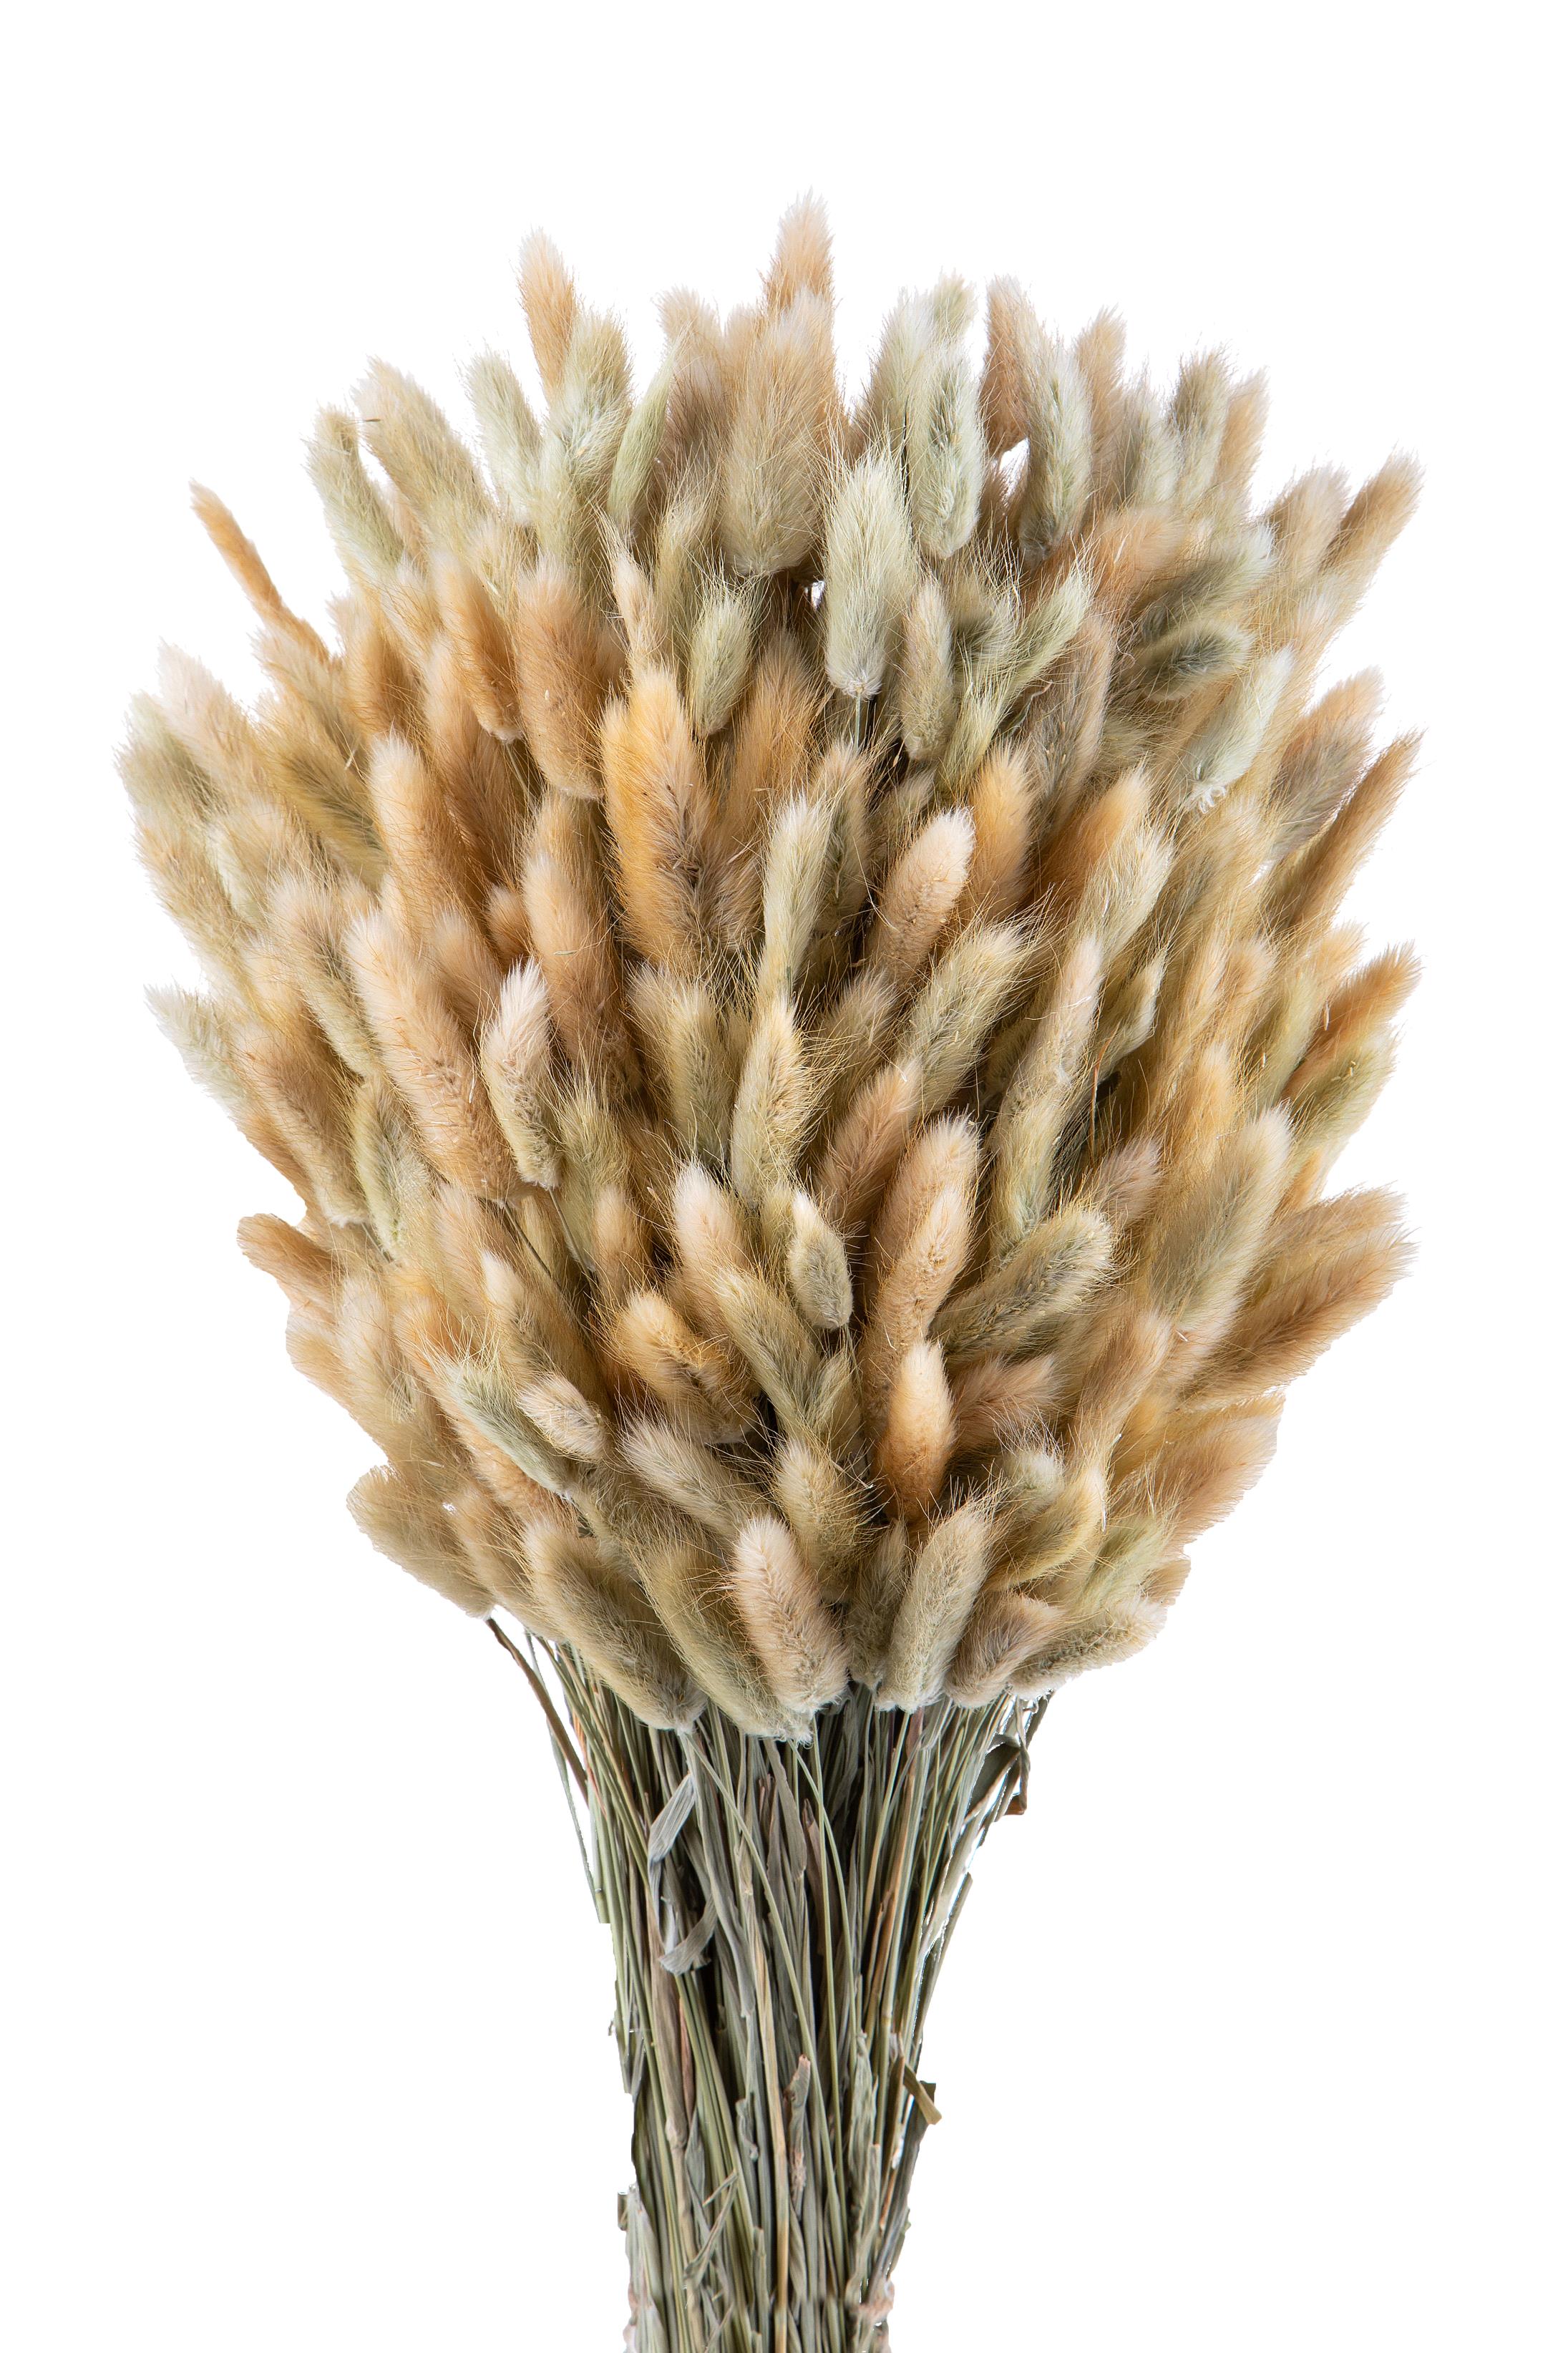 NATURAL PRODUCTS DRIED FLOWERS AND ERBS, NATURAL GRASS, LAGURUS NATURALE A KG